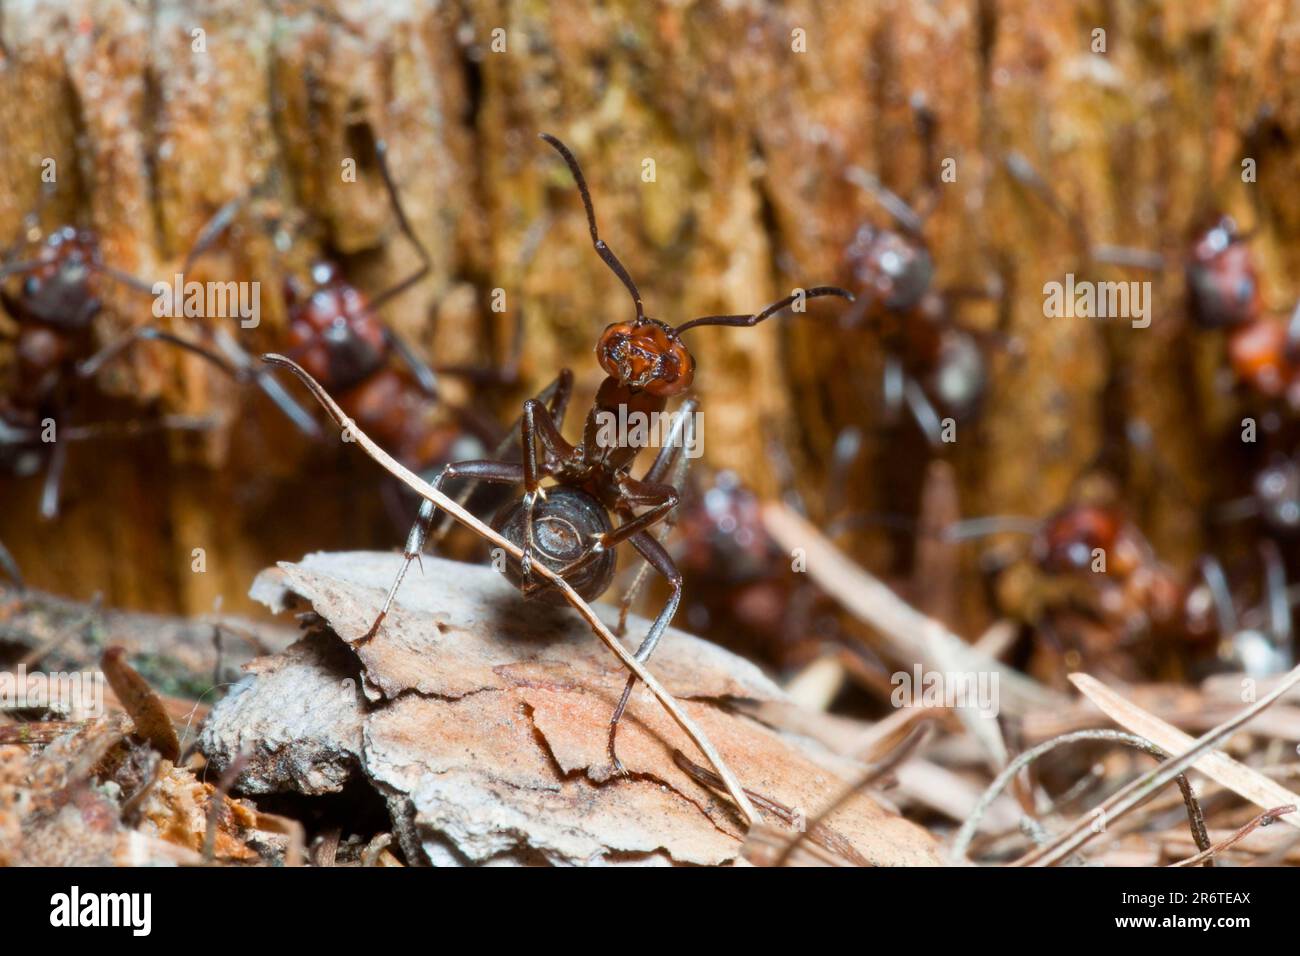 Wood Ant, transporting nest material, Lower Saxony, Germany (Formica rufa) Stock Photo